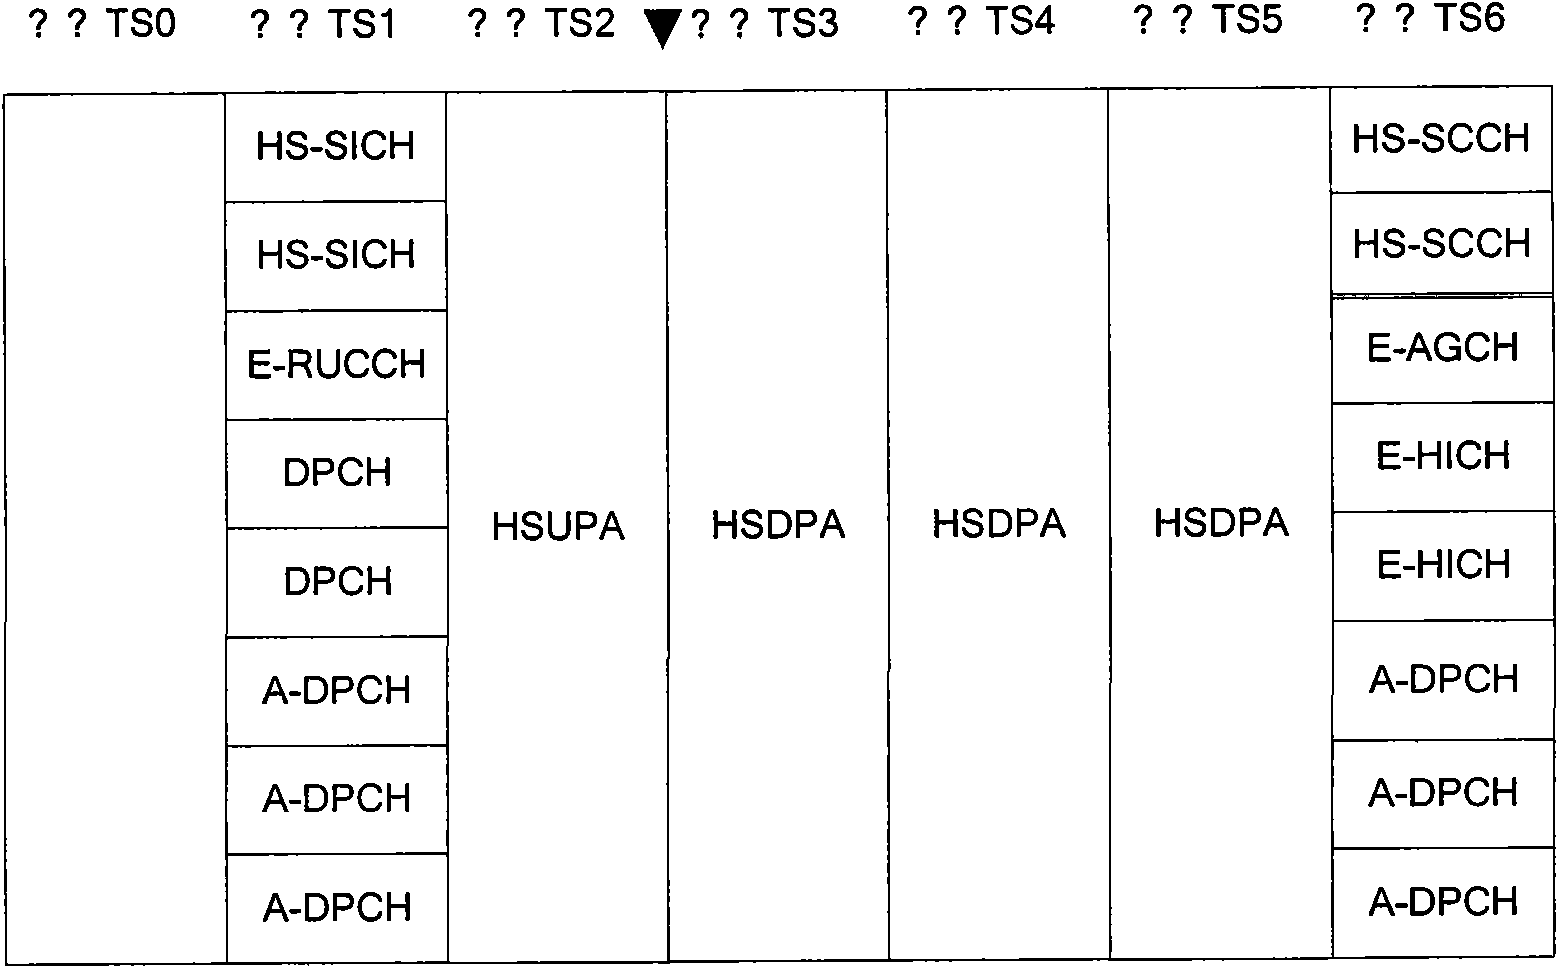 Distribution method of adjoint channels of HSPA (High Speed Packet Access) system, base station and system